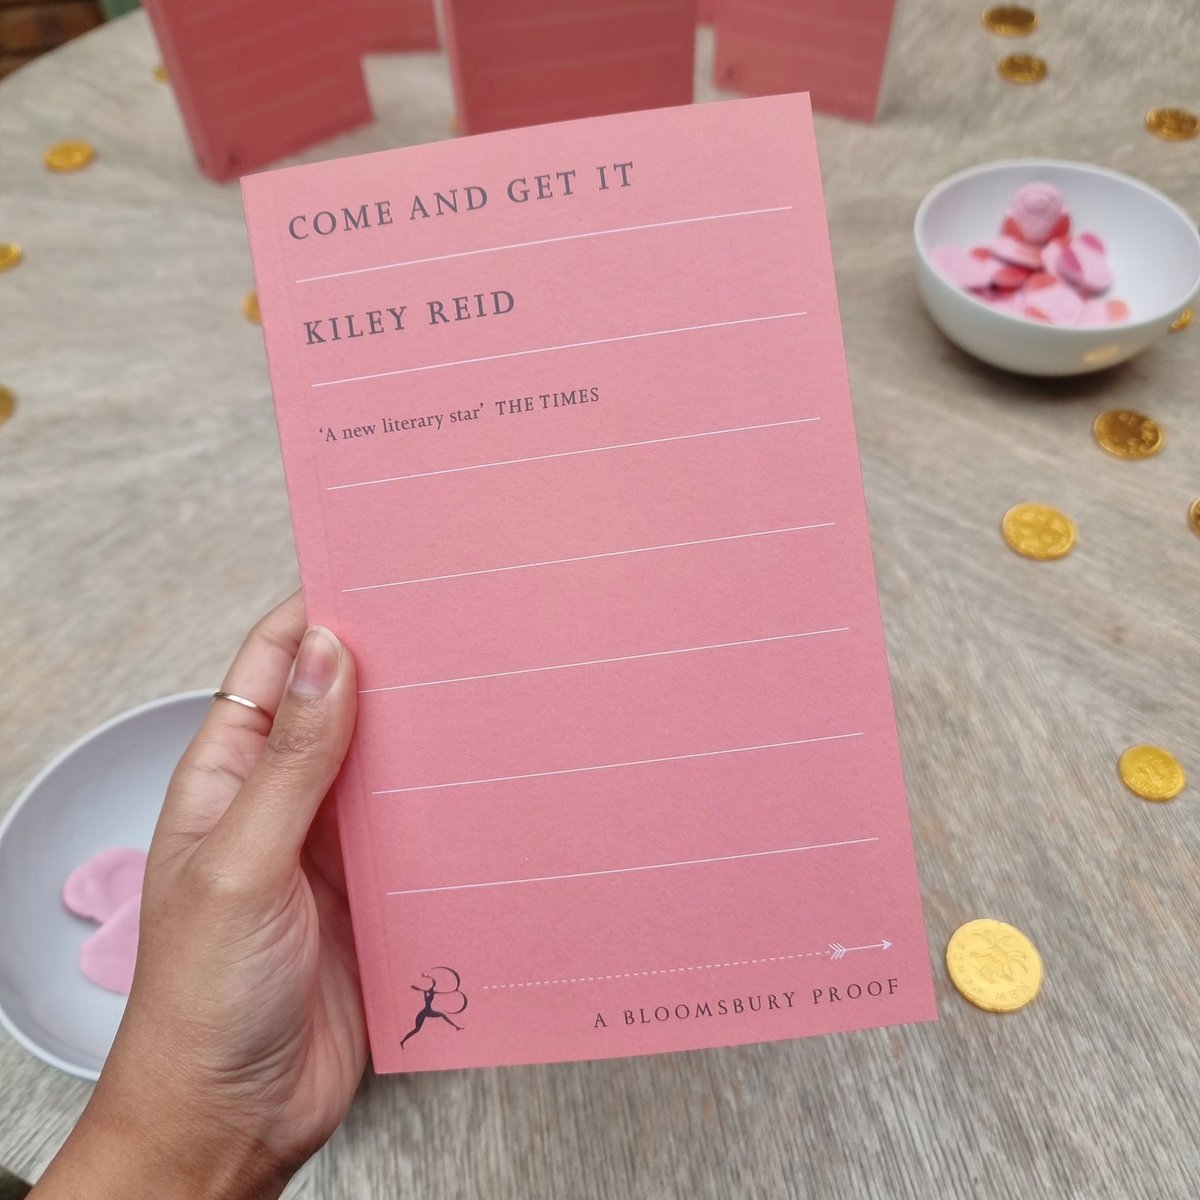 Very excited to dive into @kileyreid's new novel Come and Get It ✨️ @BloomsburyBooks